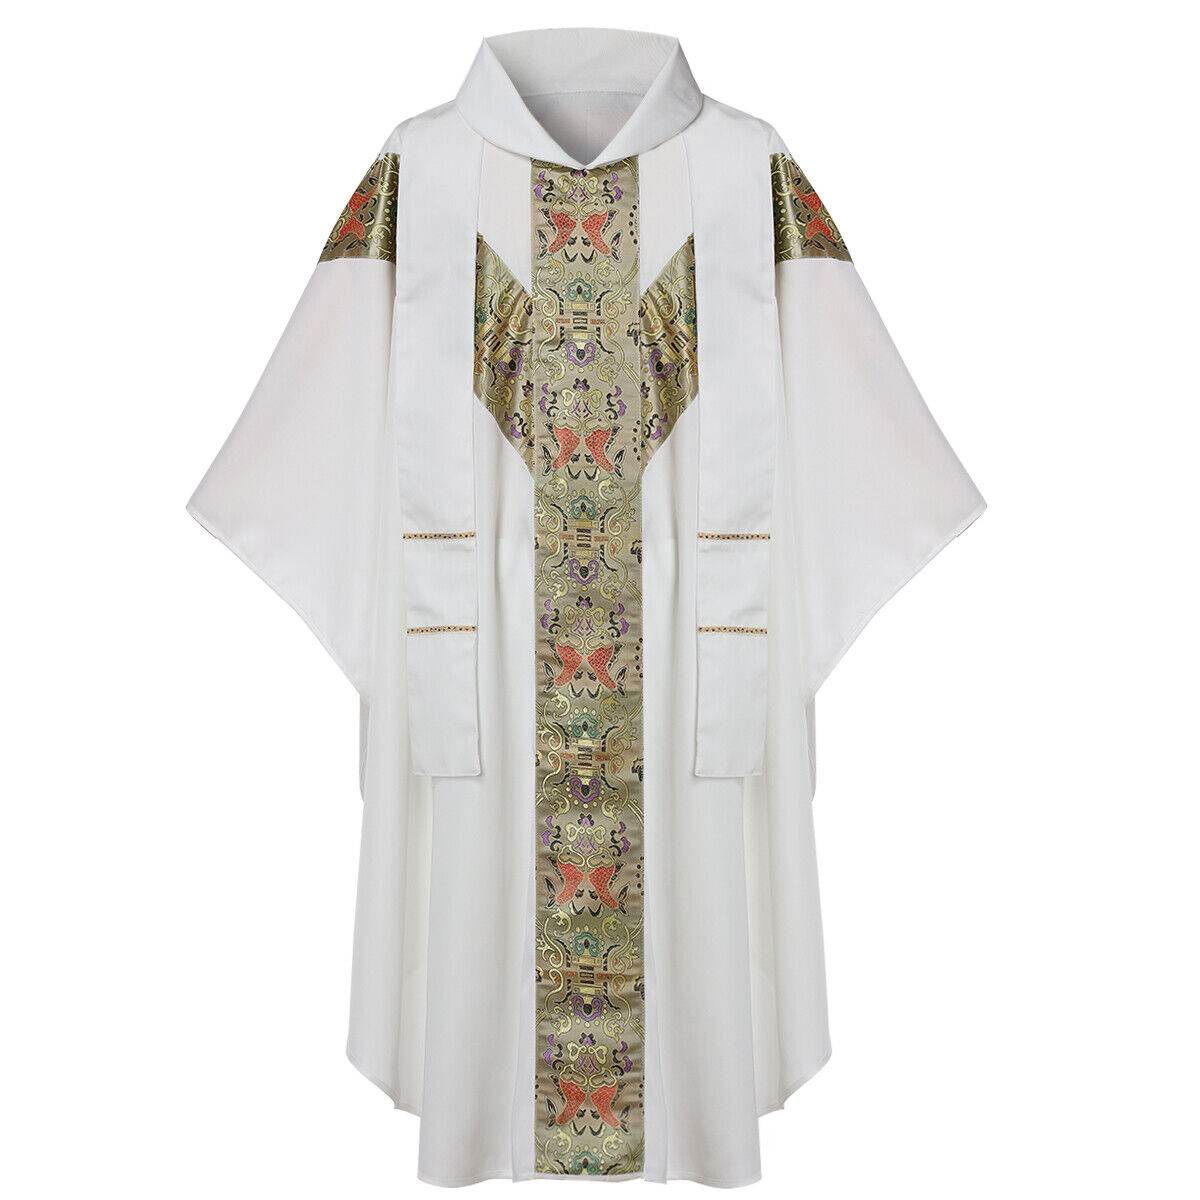 Catholic Robe Cope Chasuble Vestments Clergy Priest Pastor Embroidery Church